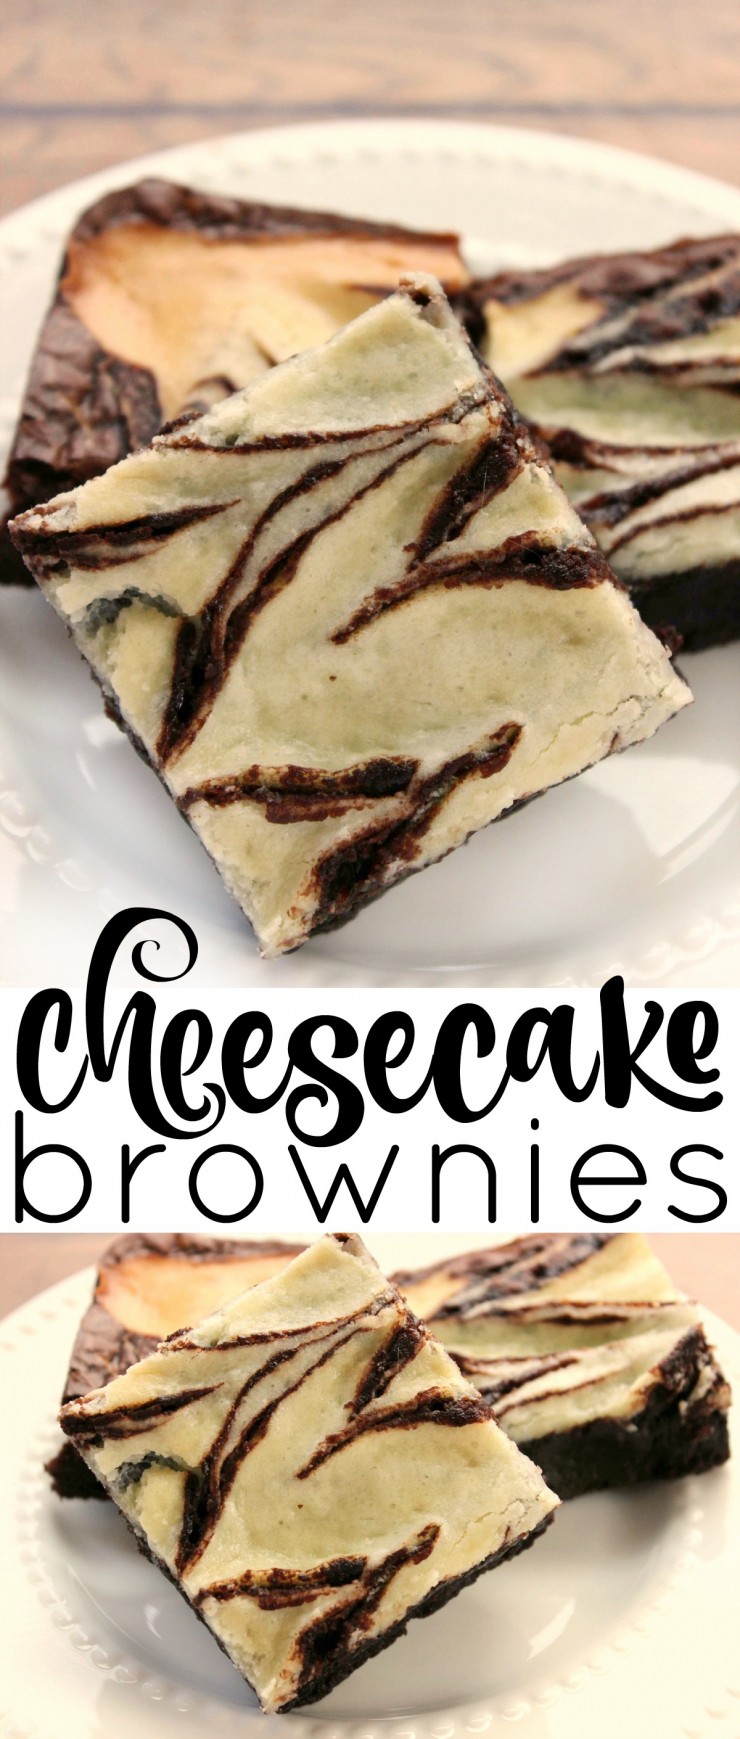 These Cheesecake brownies are a quick and easy box mix upgrade recipe that is always a crowd pleaser or perfect enjoyed with a hot coffee. 